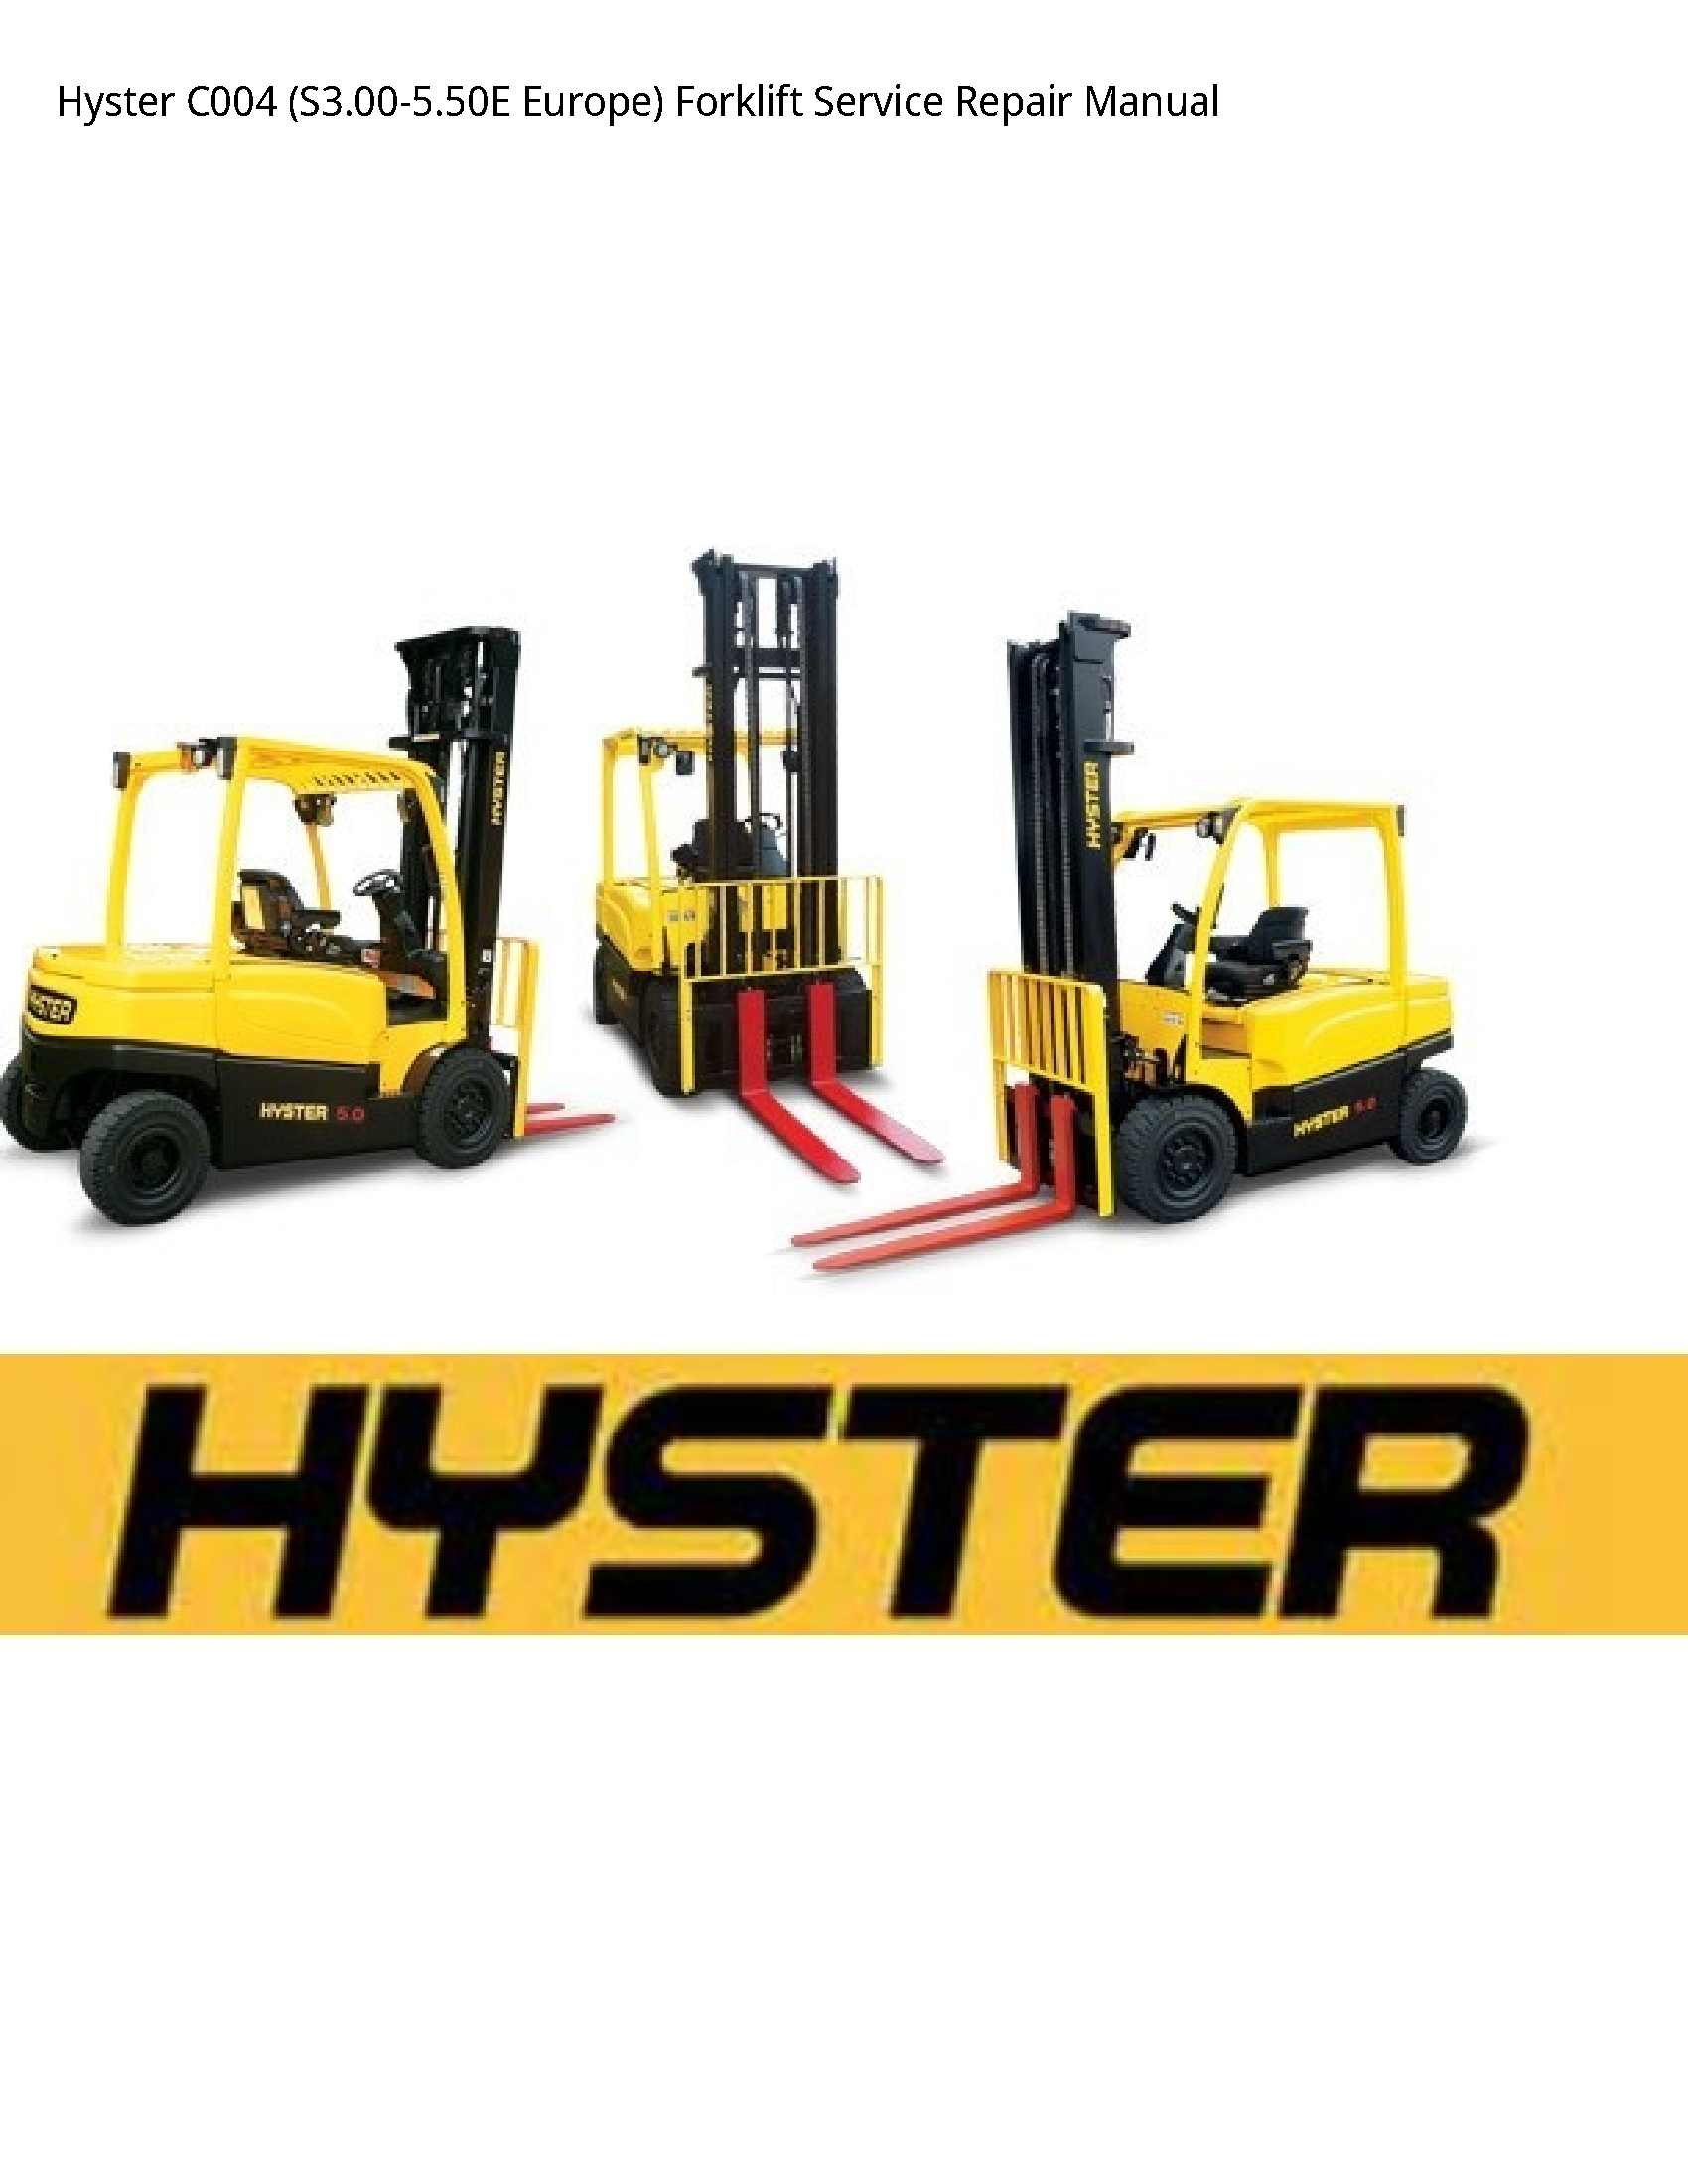 Hyster C004 Europe) Forklift manual